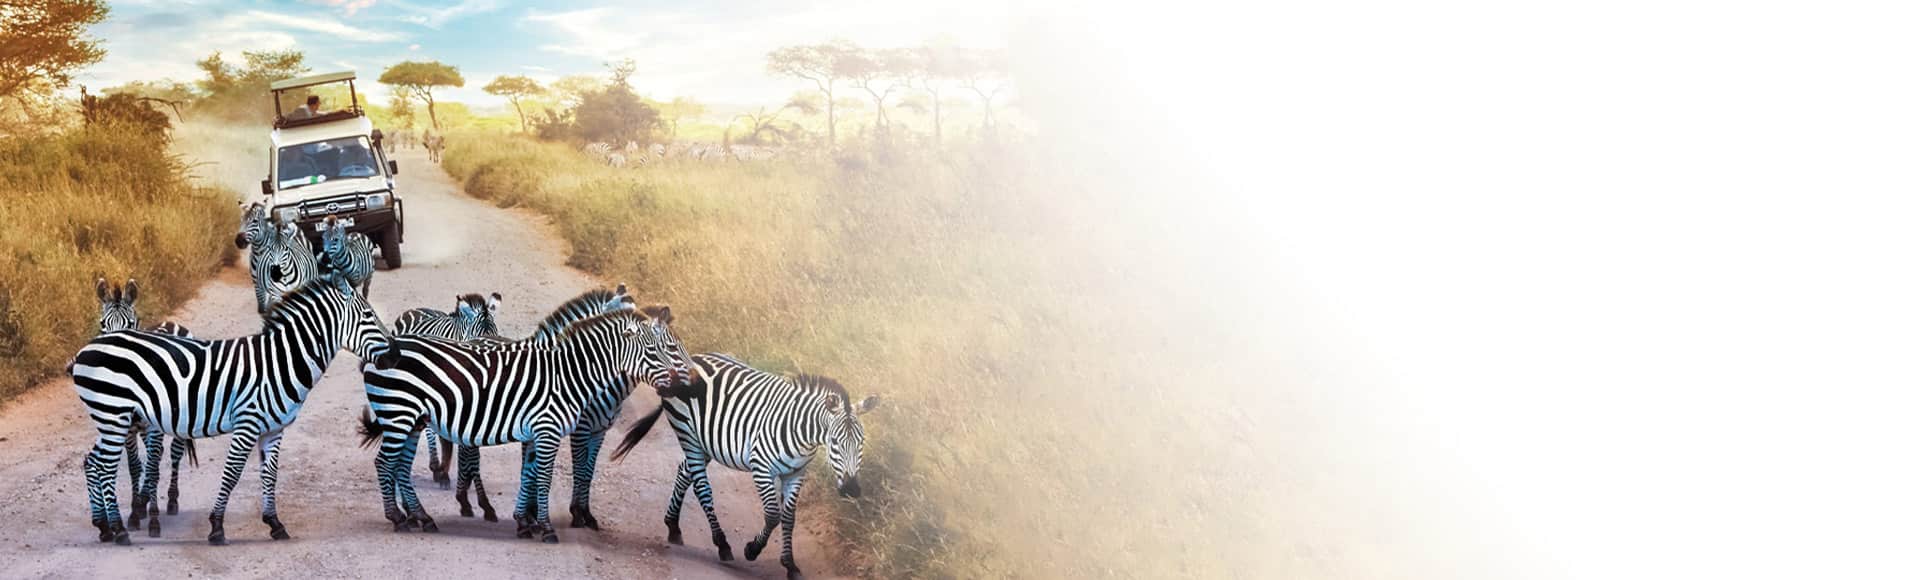 Book a tour to see a dazzle of zebras on caravan wth Oceania Cruises land program. 